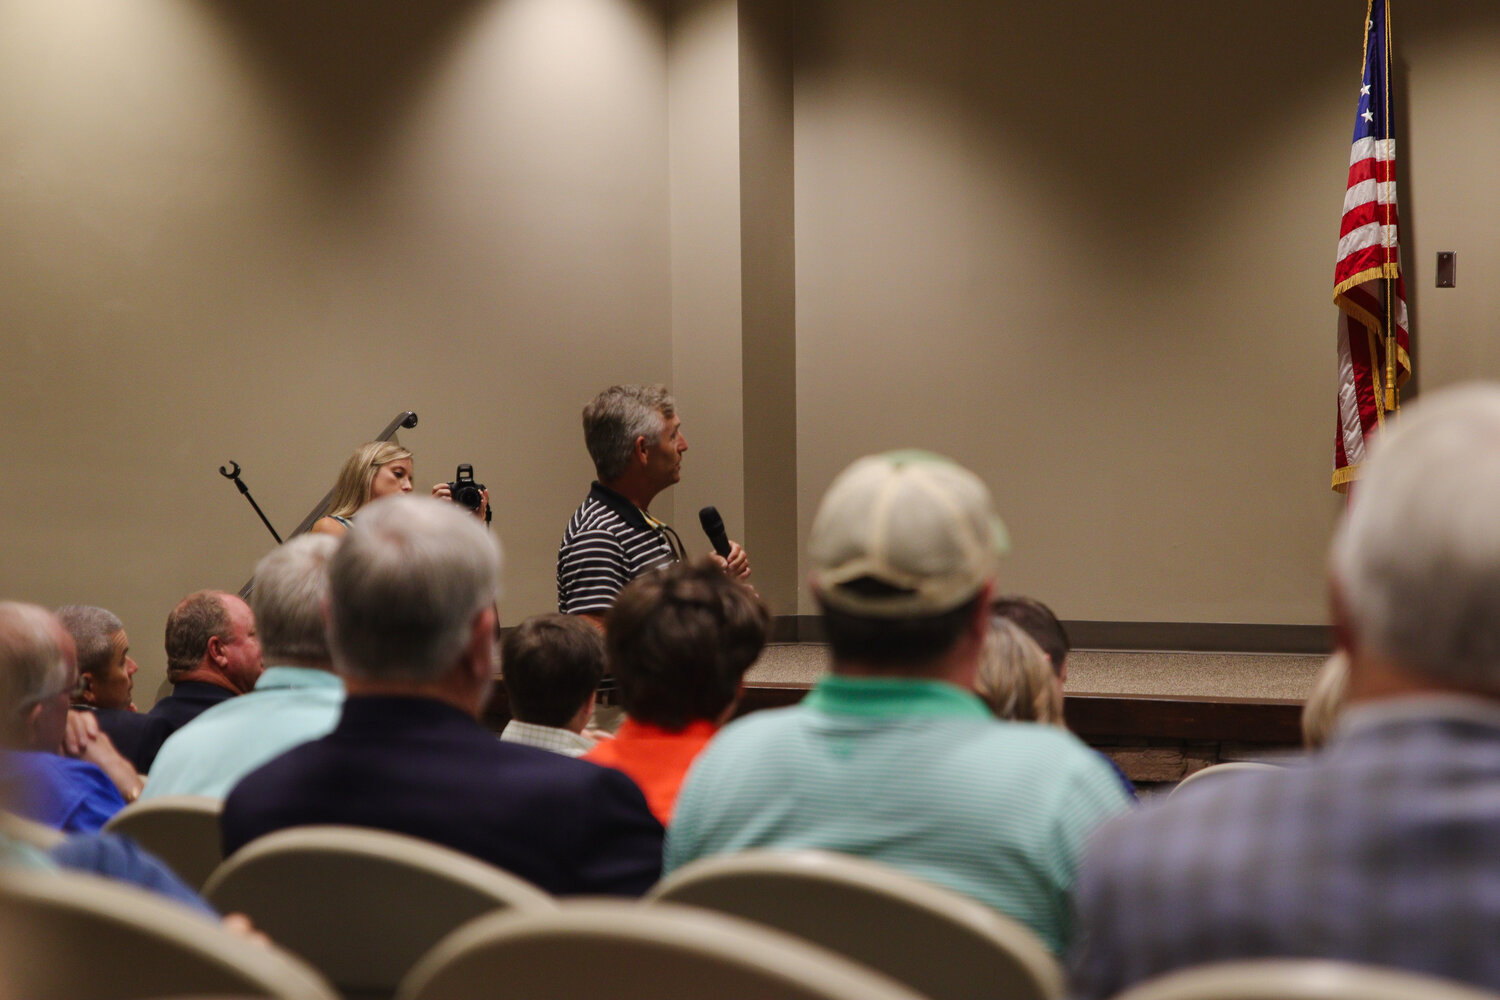 During the discussion, attendees voiced their concerns about labor issues, particularly the difficulty in hiring American workers. One attendee expressed reliance on the H-2A program and worries that changes to the program might affect their business and increase labor costs.